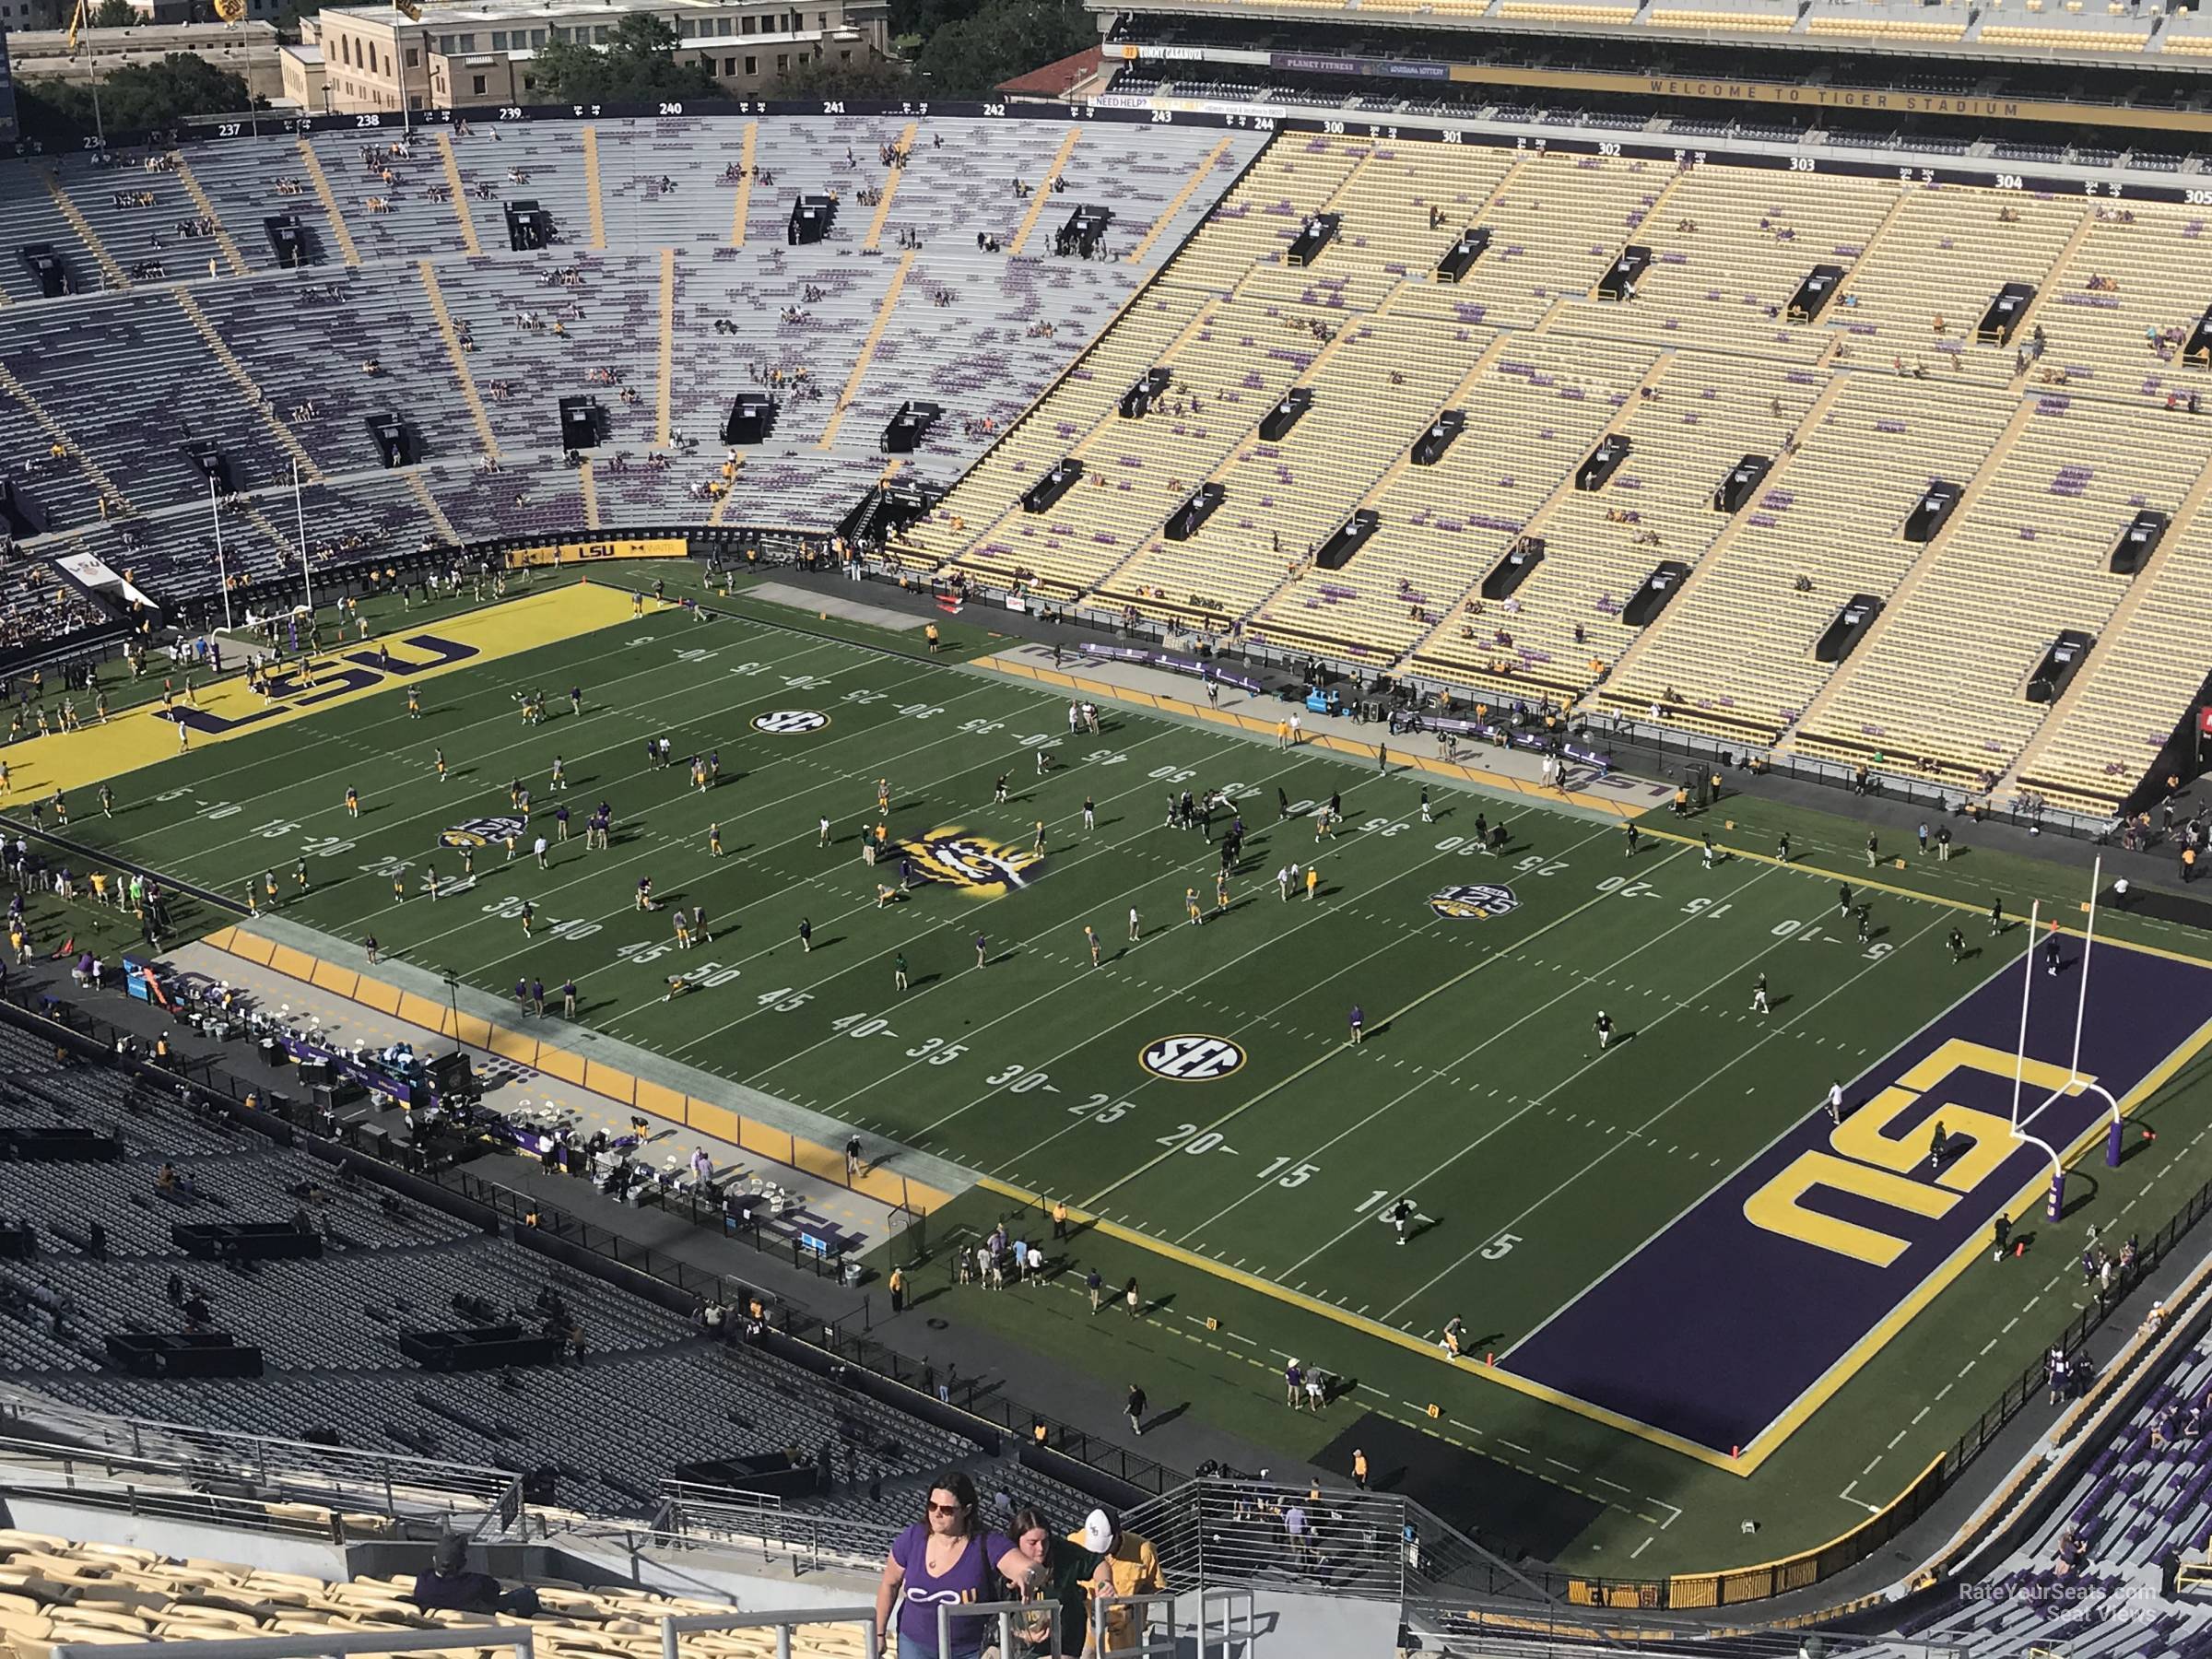 Section 610 at Tiger Stadium - RateYourSeats.com